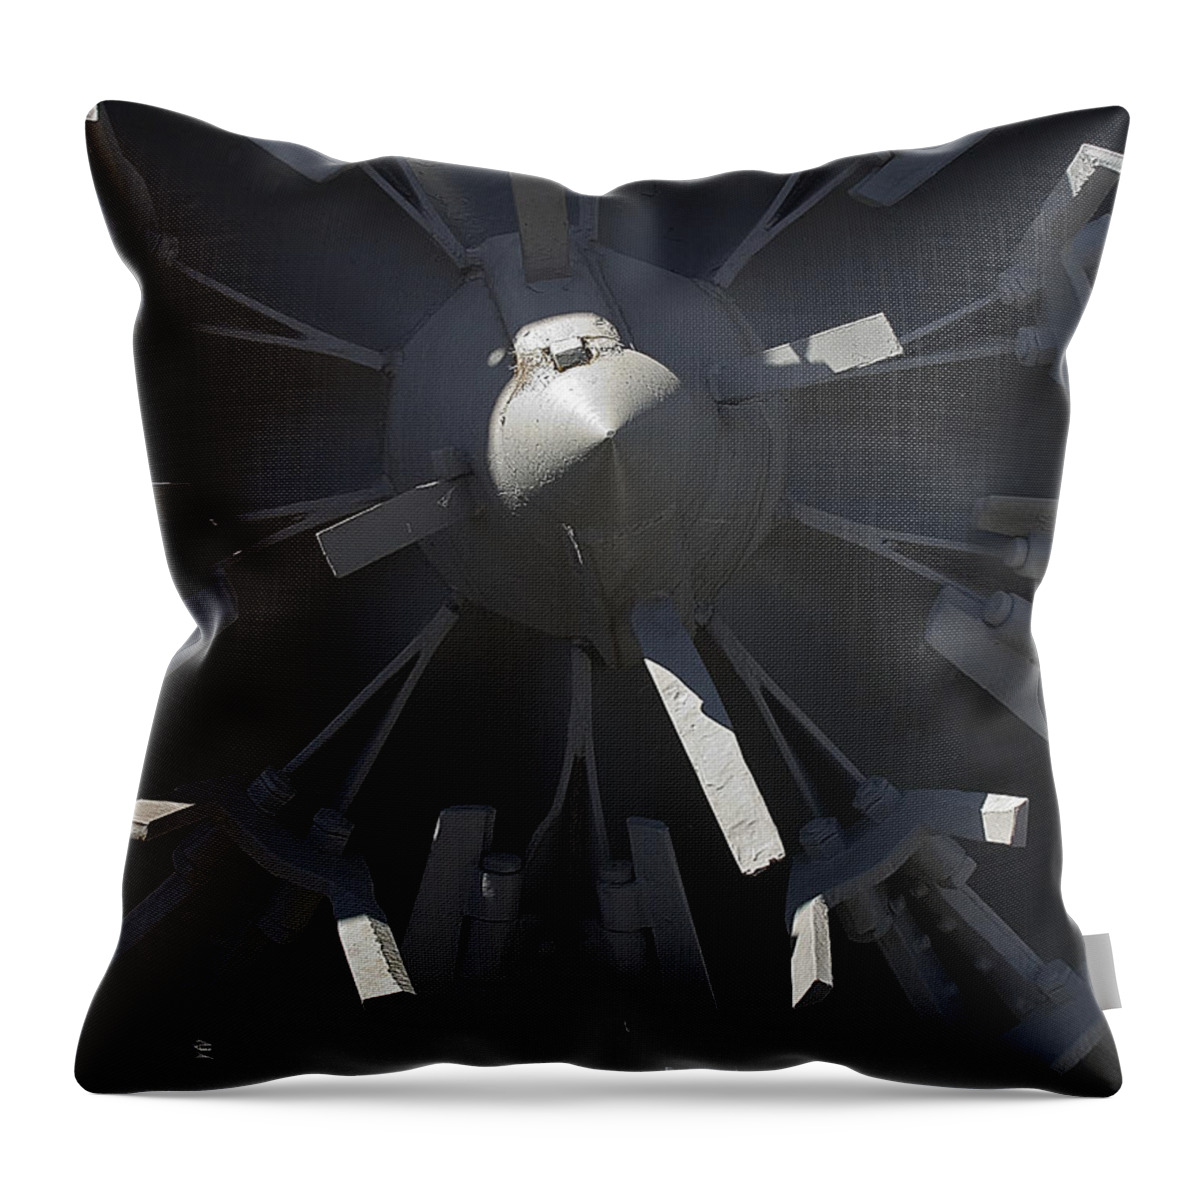 Chama Throw Pillow featuring the photograph Snowblower by Steven Ralser